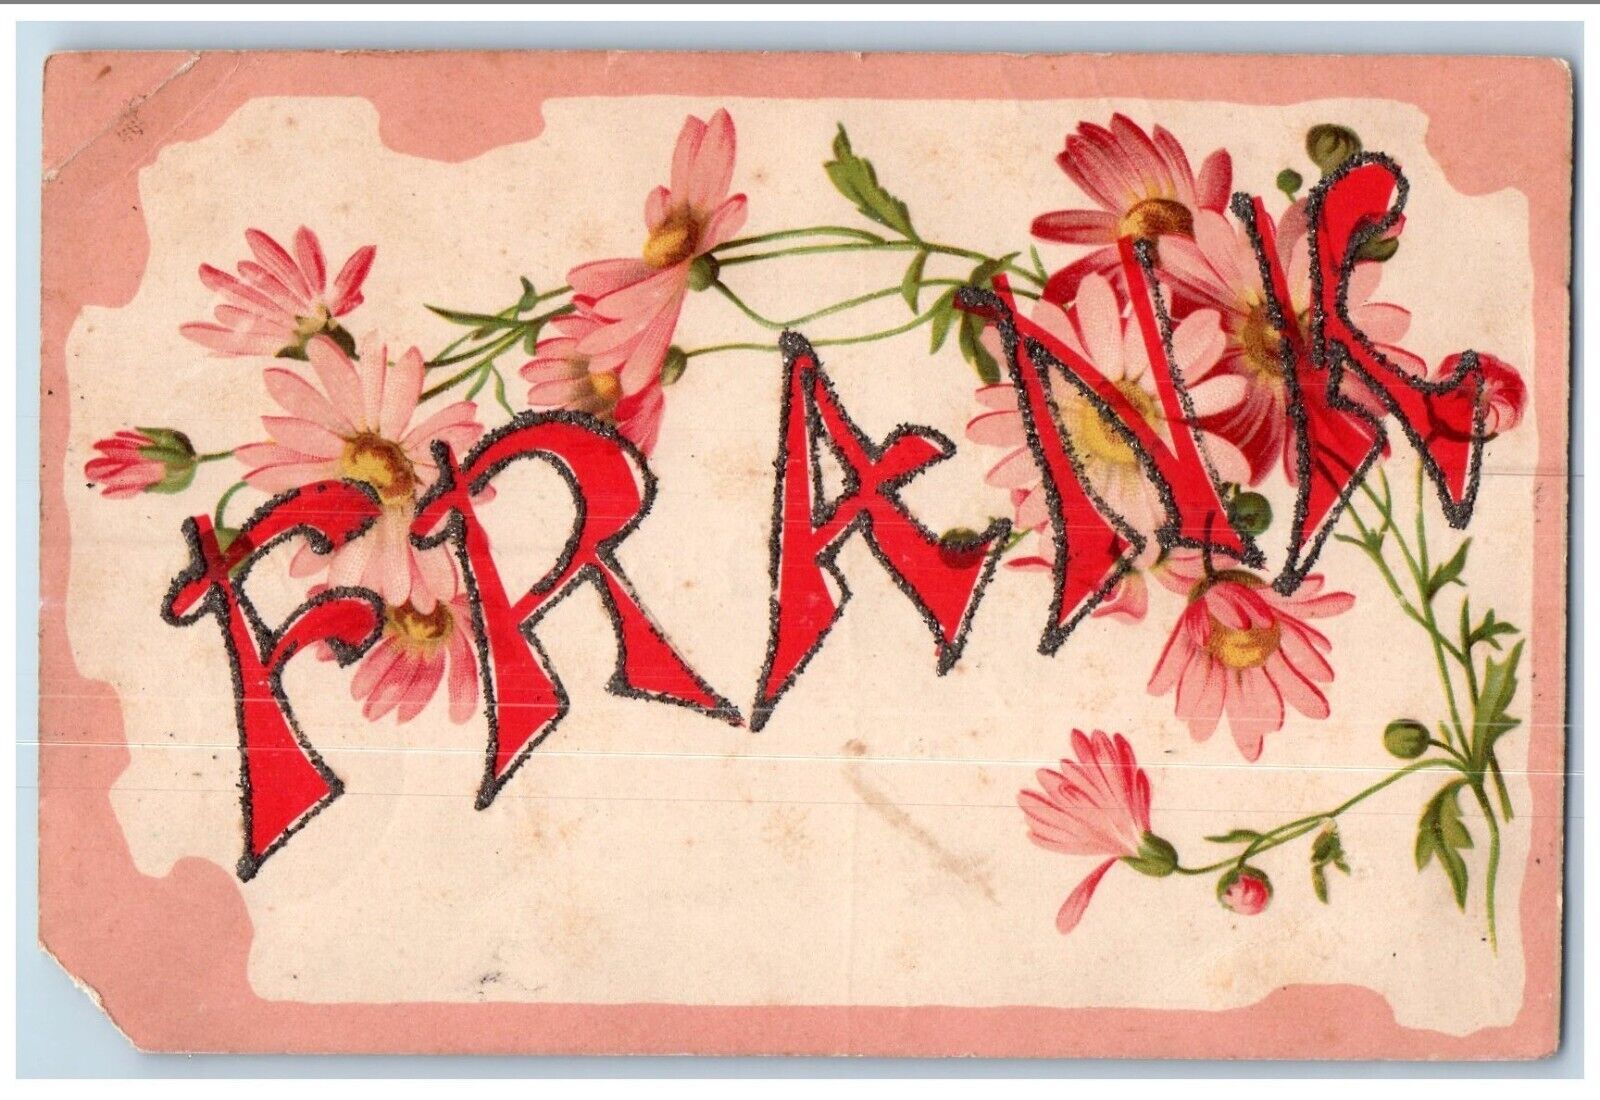 Boys Name Postcard Frank Large Letters Glitter Flowers 1907 Posted Antique